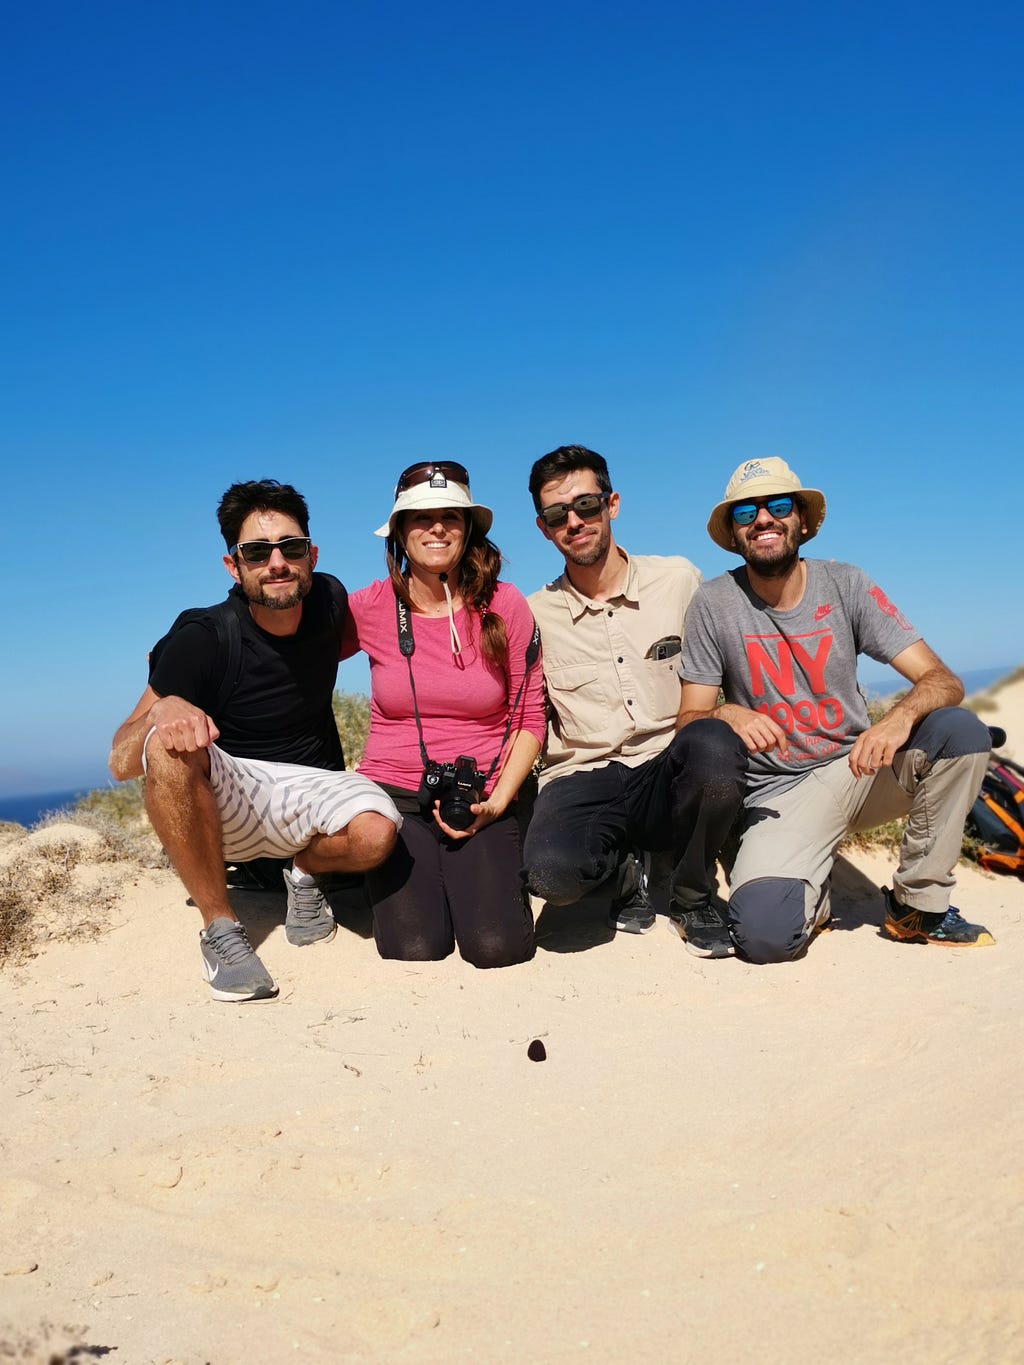 Team of four researchers sat smiling on a sand dune with blue sky behind them.